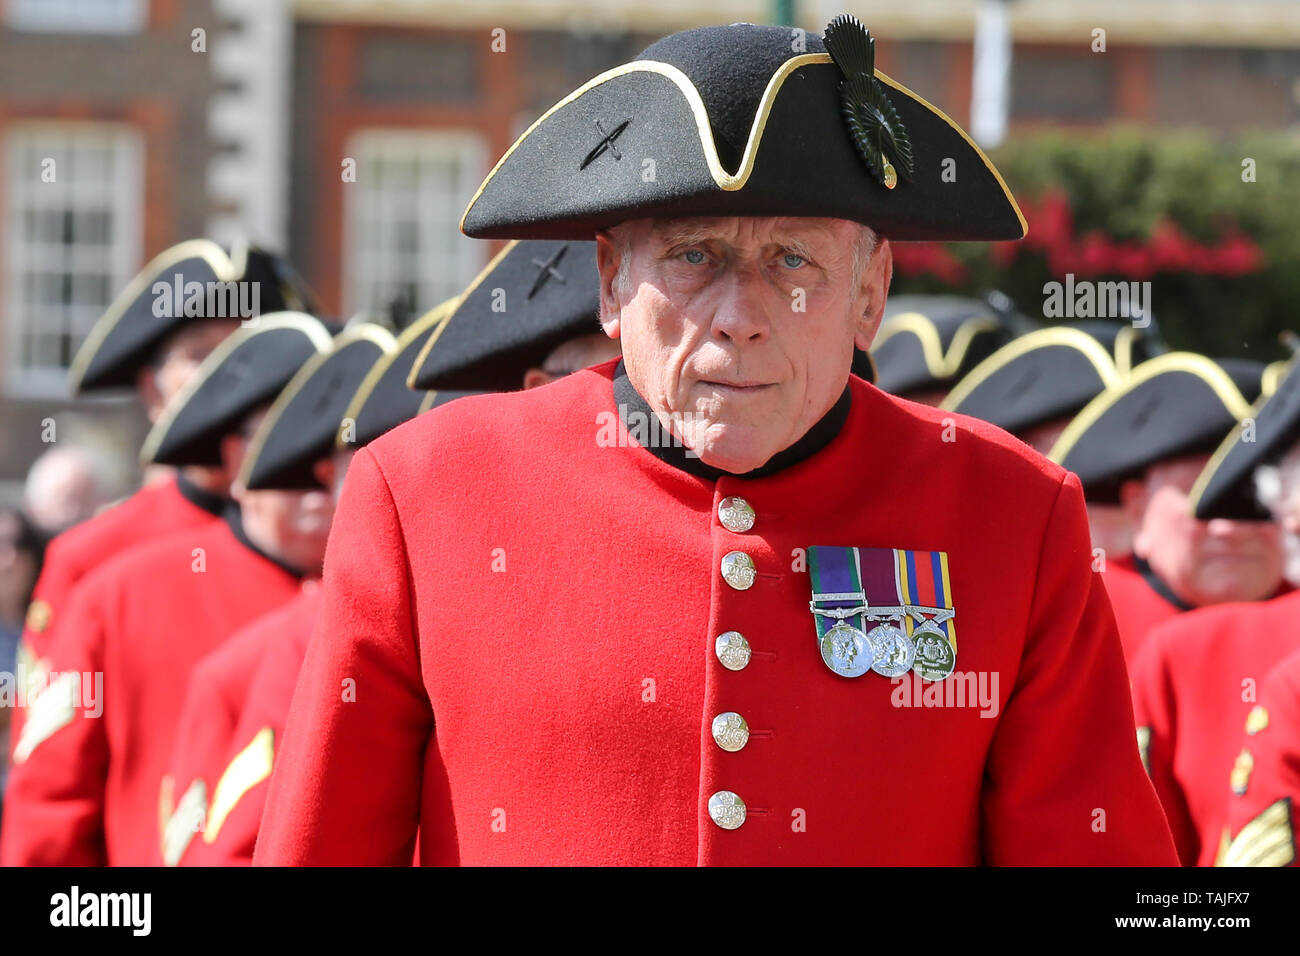 London, UK. 25th May 2019. A Scottish bagpiper leads a Chelsea Pensioners march at the RHS Chelsea Flower Show on the final day of the show. The Royal Horticultural Society Chelsea Flower Show is an annual garden show held in the grounds of the Royal Hospital Chelsea in West London since 1913.  Credit: Dinendra Haria/Alamy Live News Stock Photo